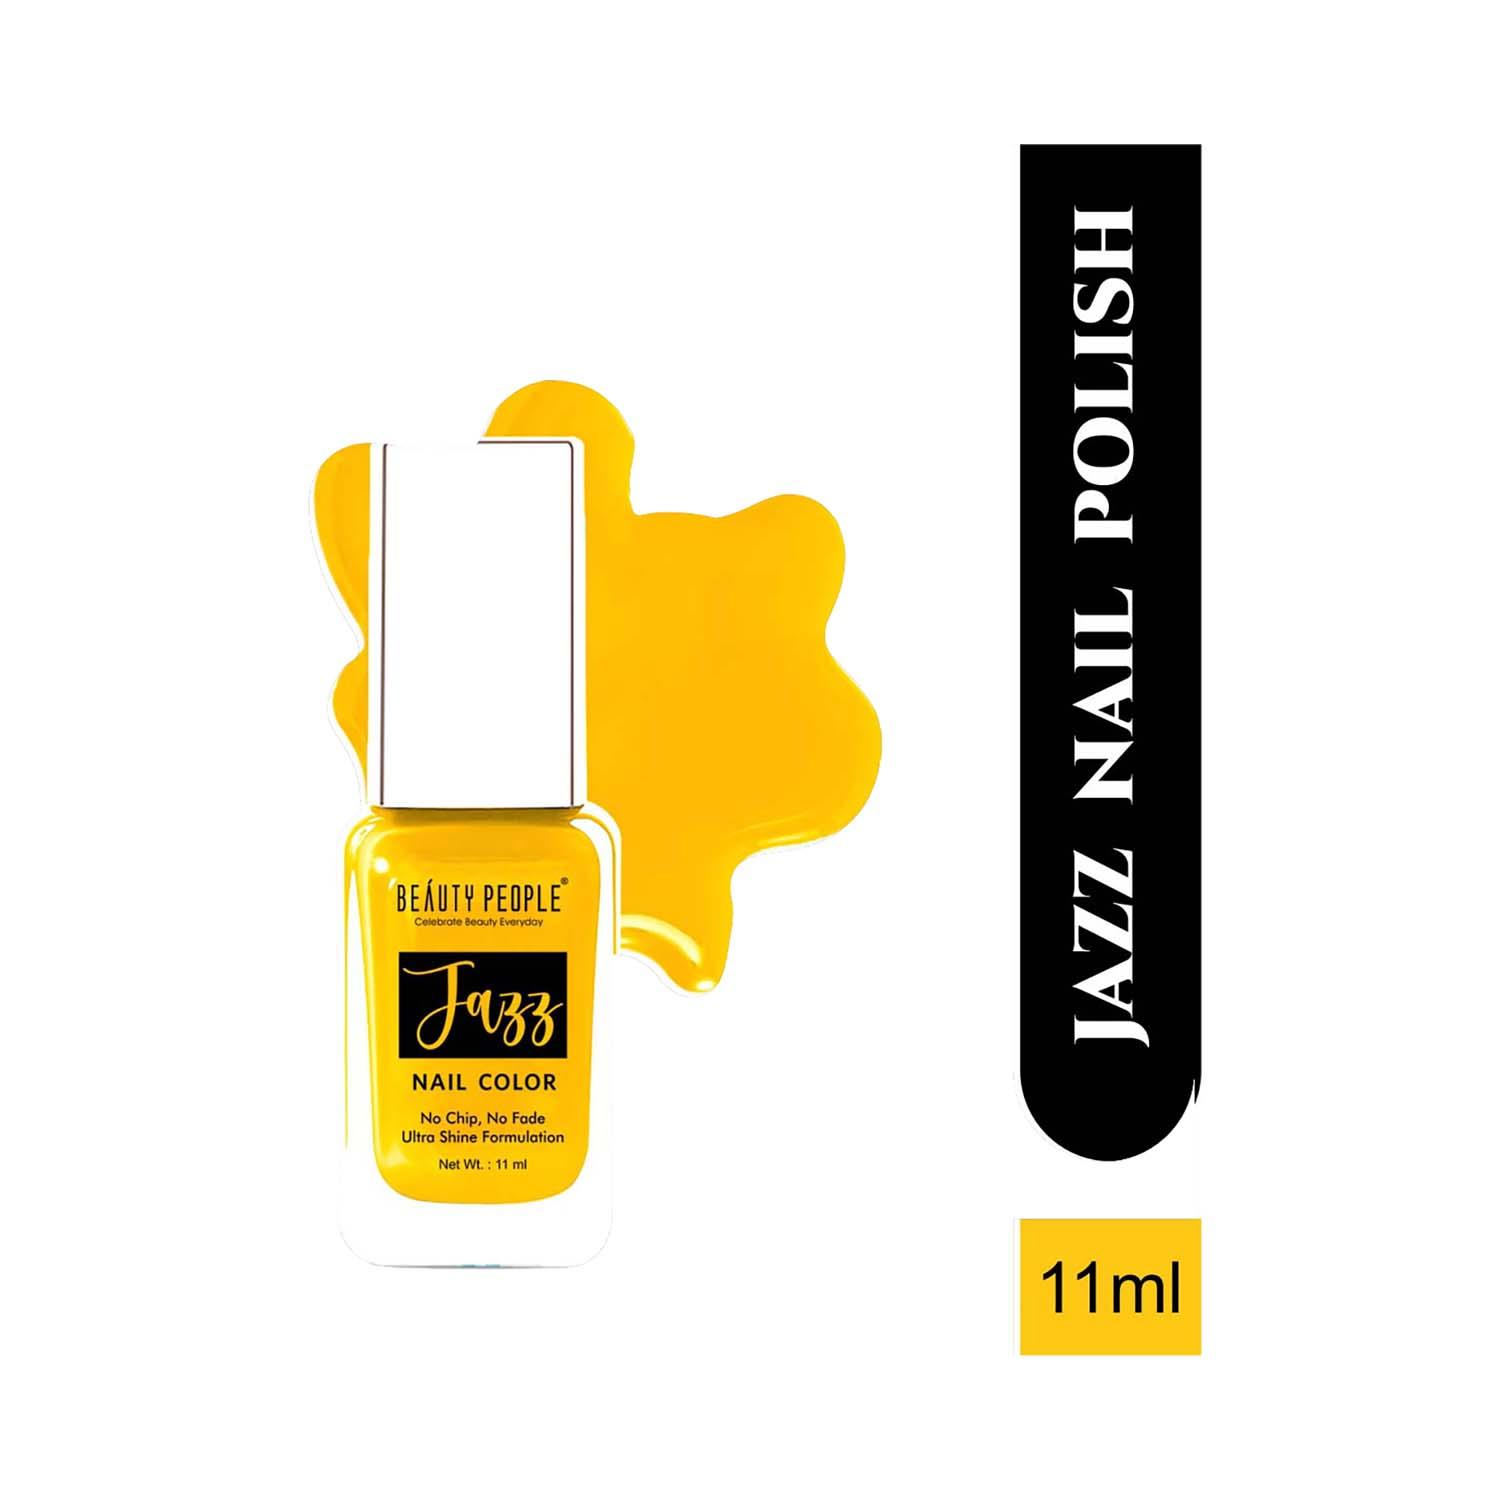 Beauty People | Beauty People Jazz Nail Color - 358 Happy Yellow (11ml)